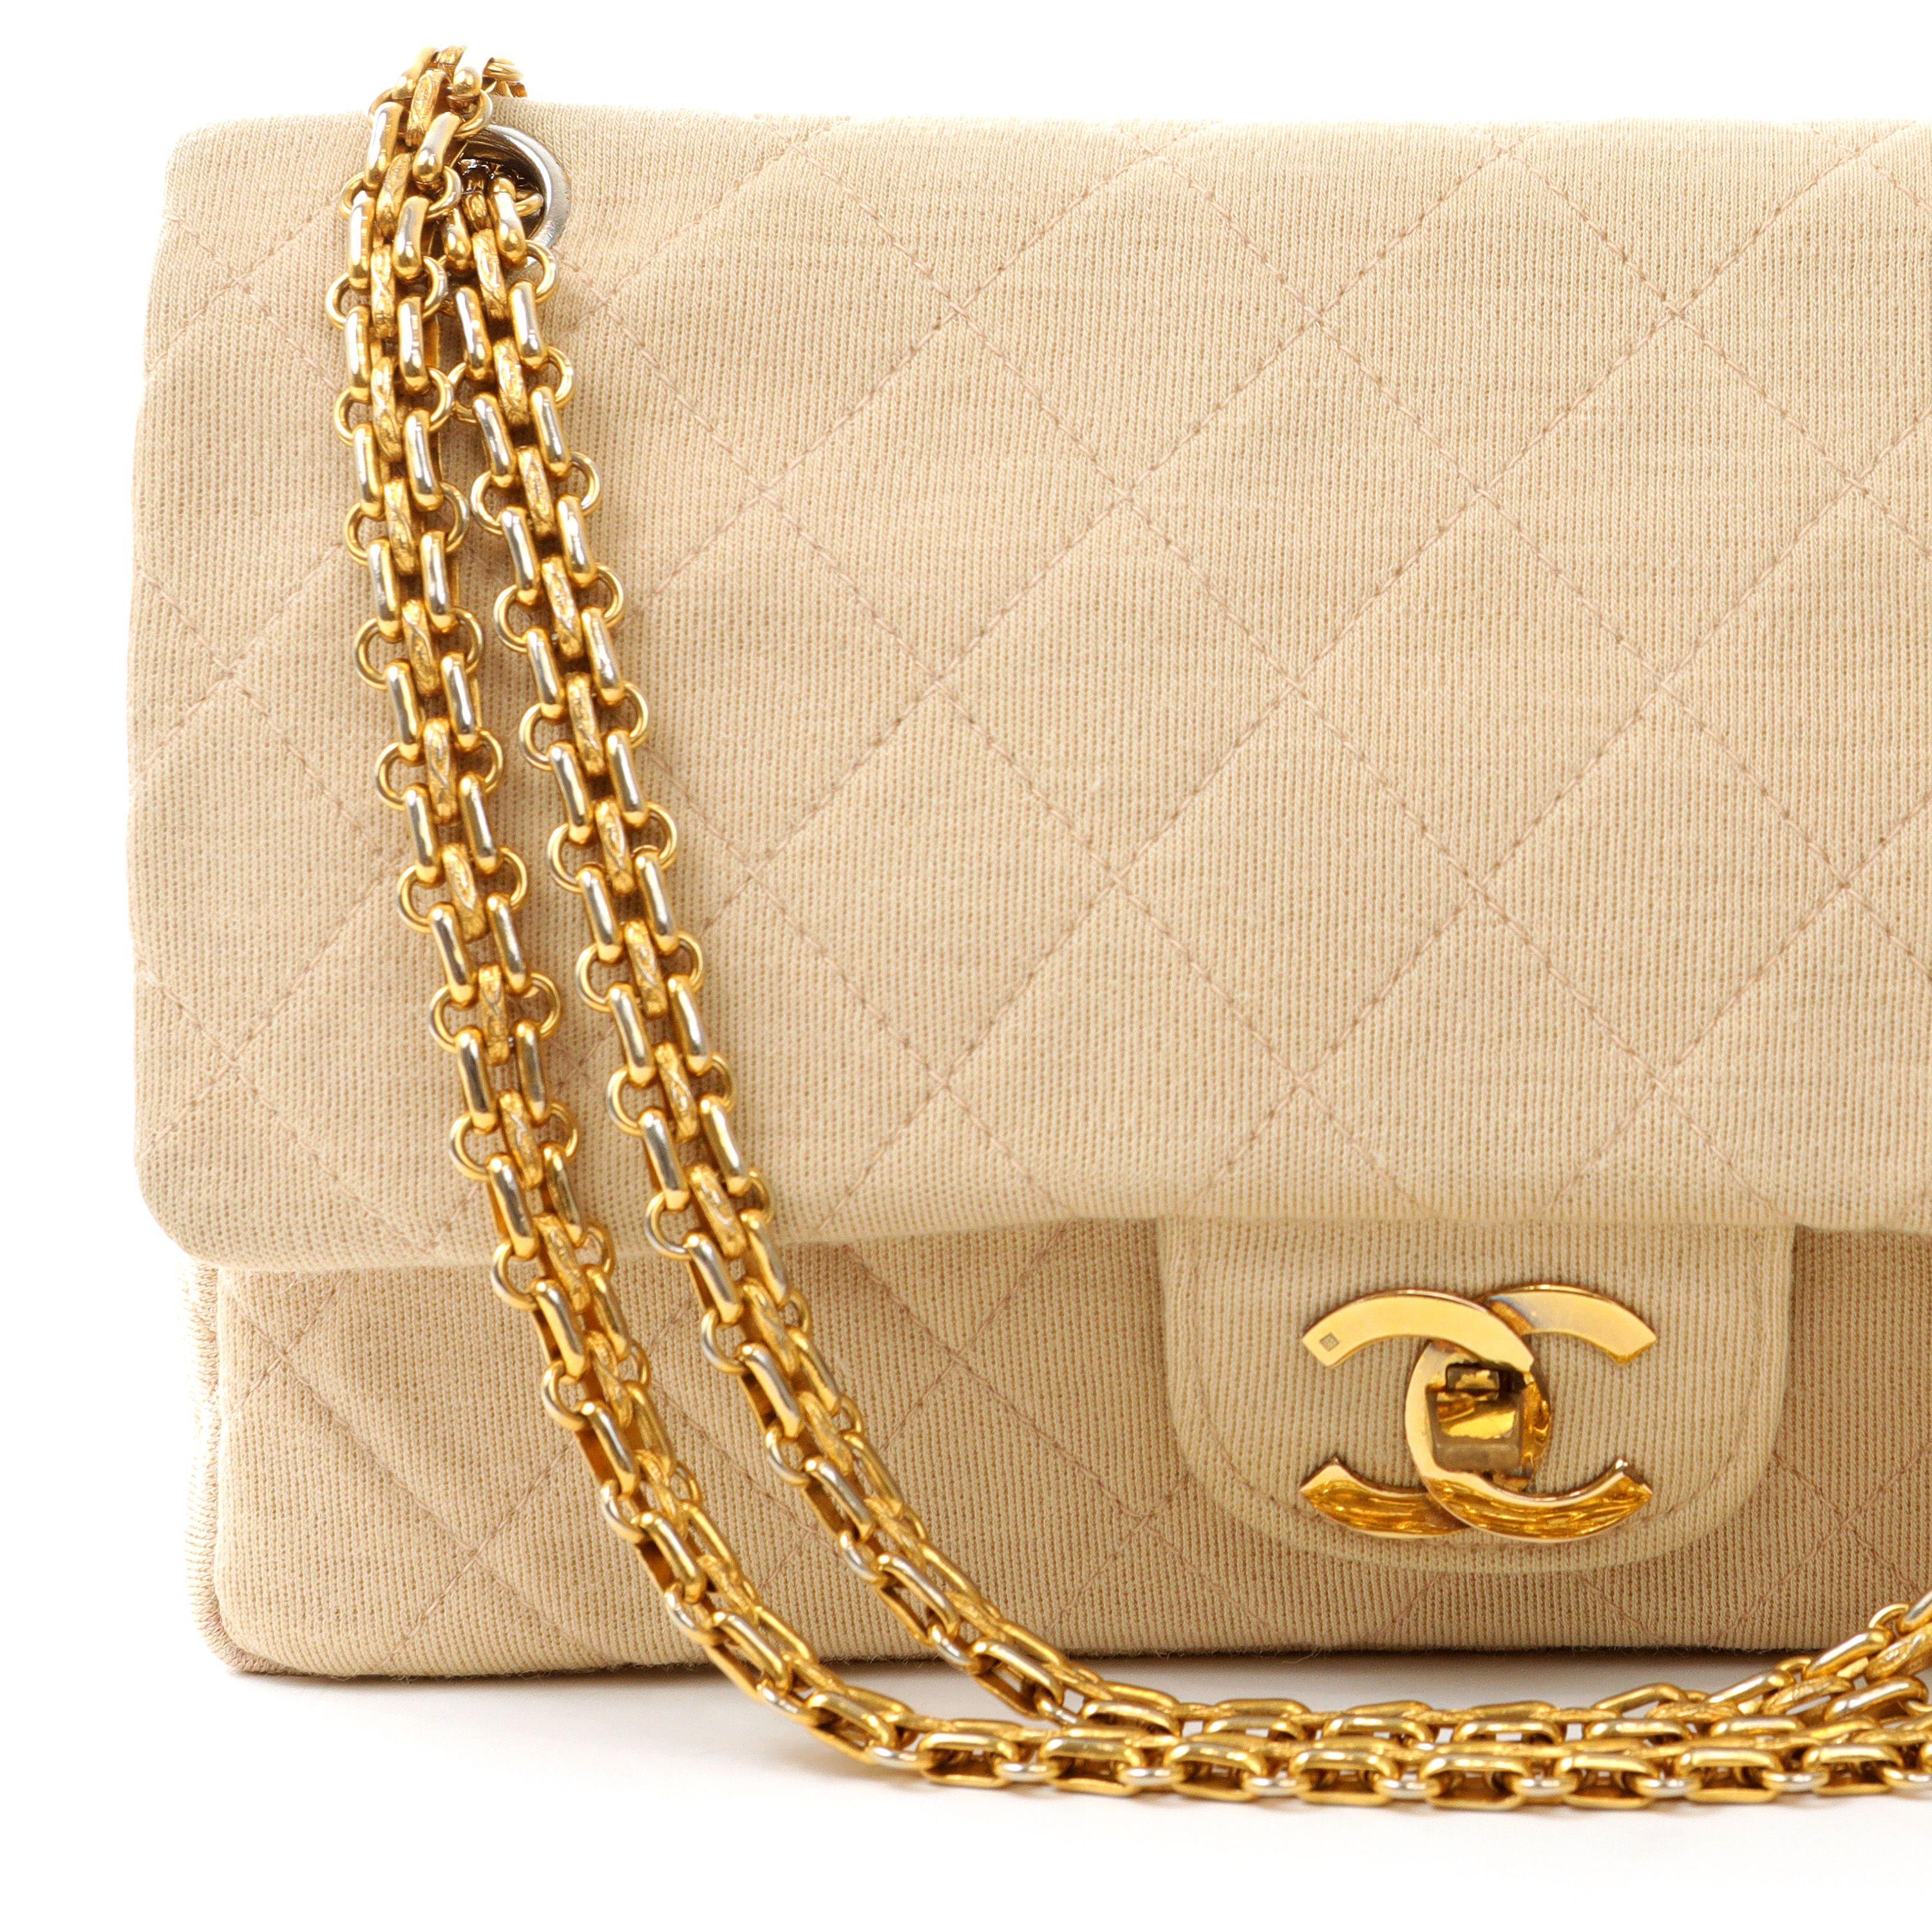 Chanel Vintage Beige Jersey Medium Classic Flap Bag In Good Condition For Sale In Palm Beach, FL